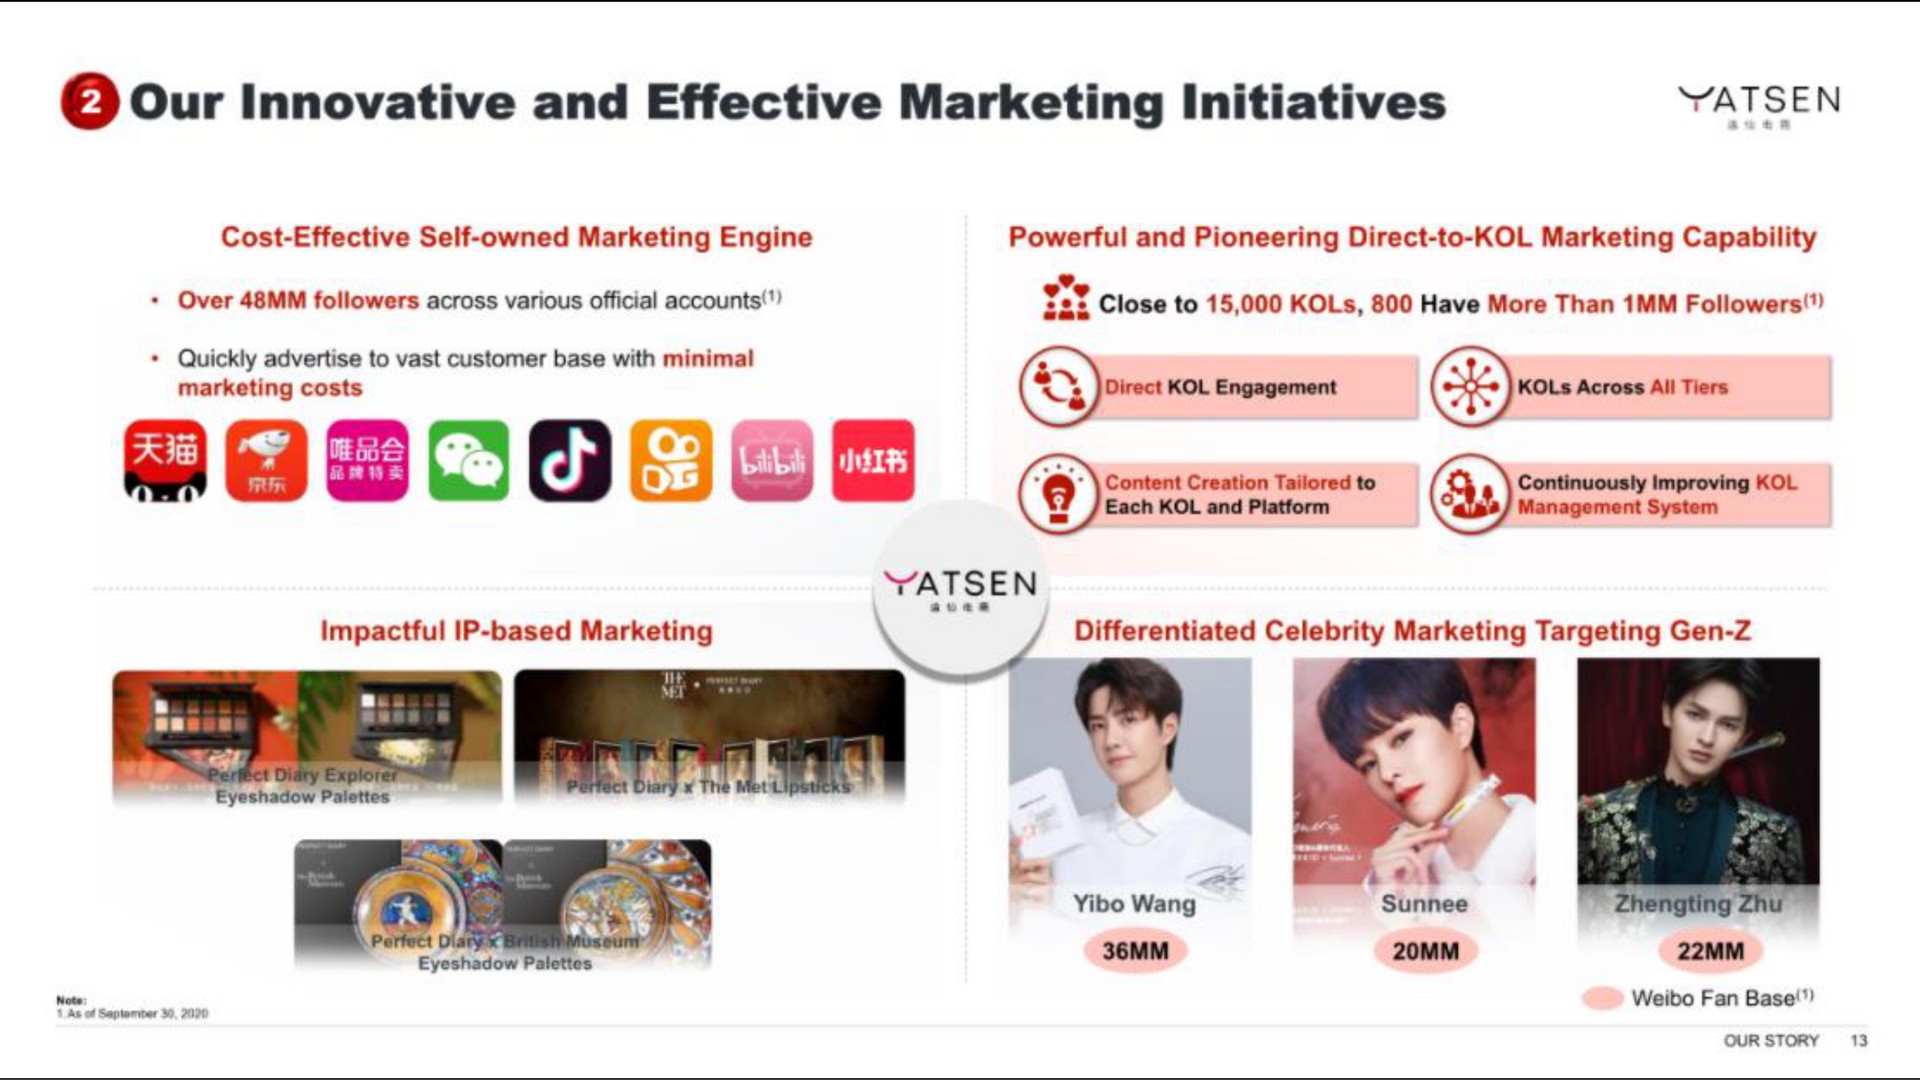 our innovative and effective marketing initiatives | Yatsen